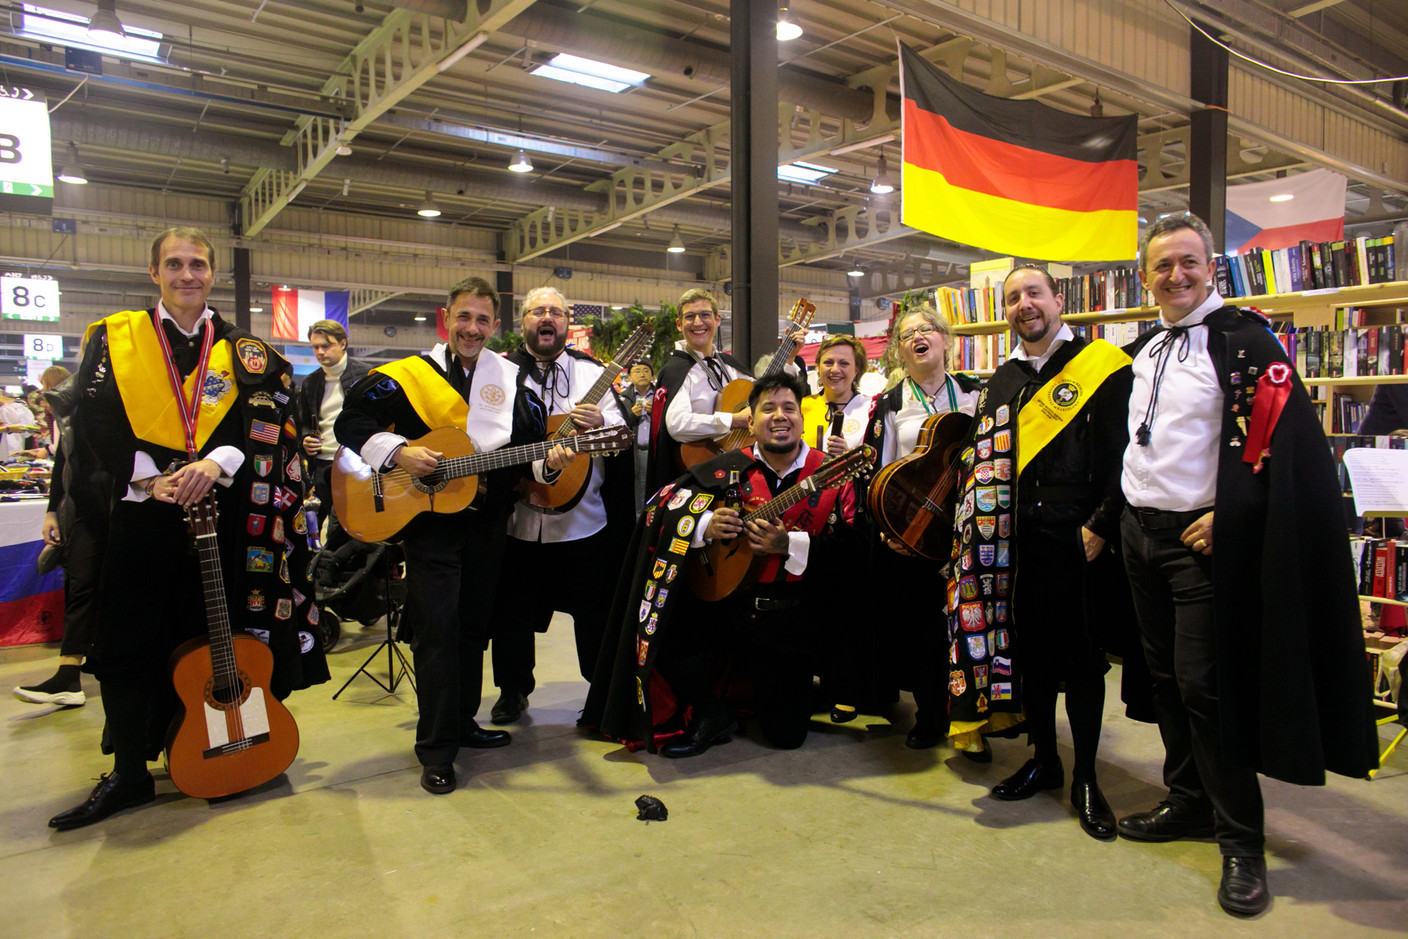 Musicians from the Spanish stand perform. Matic Zorman / Maison Moderne